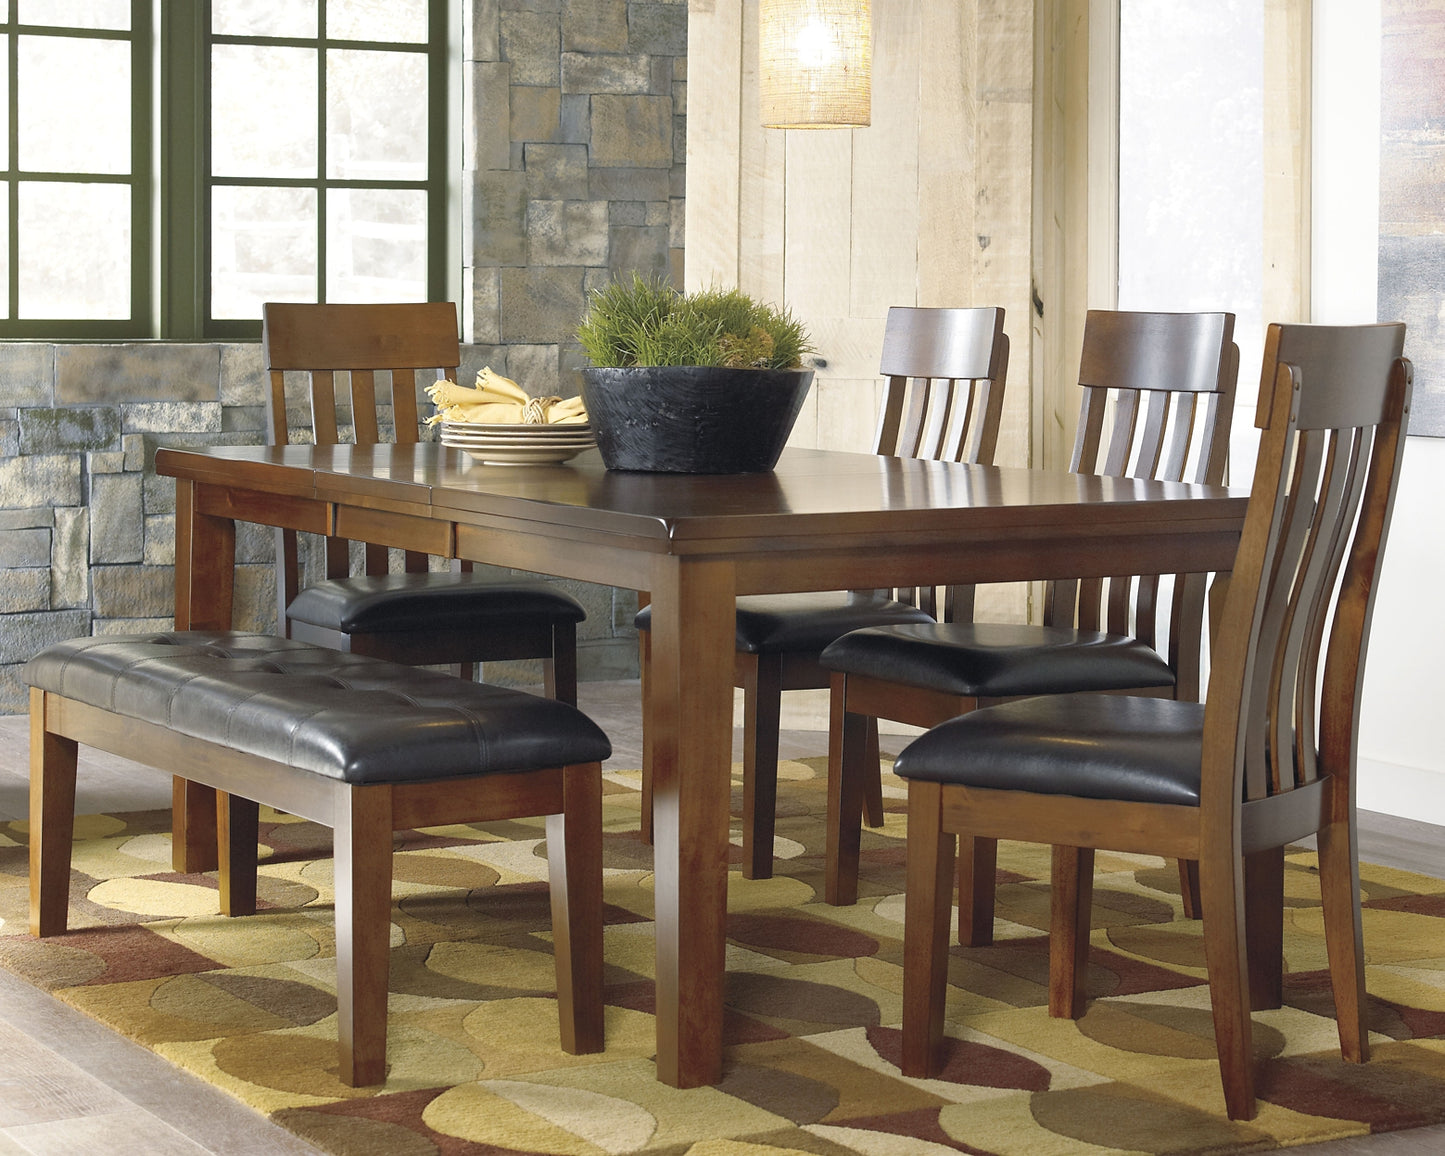 Ralene Dining Table and 8 Chairs with Storage Wilson Furniture (OH)  in Bridgeport, Ohio. Serving Bridgeport, Yorkville, Bellaire, & Avondale